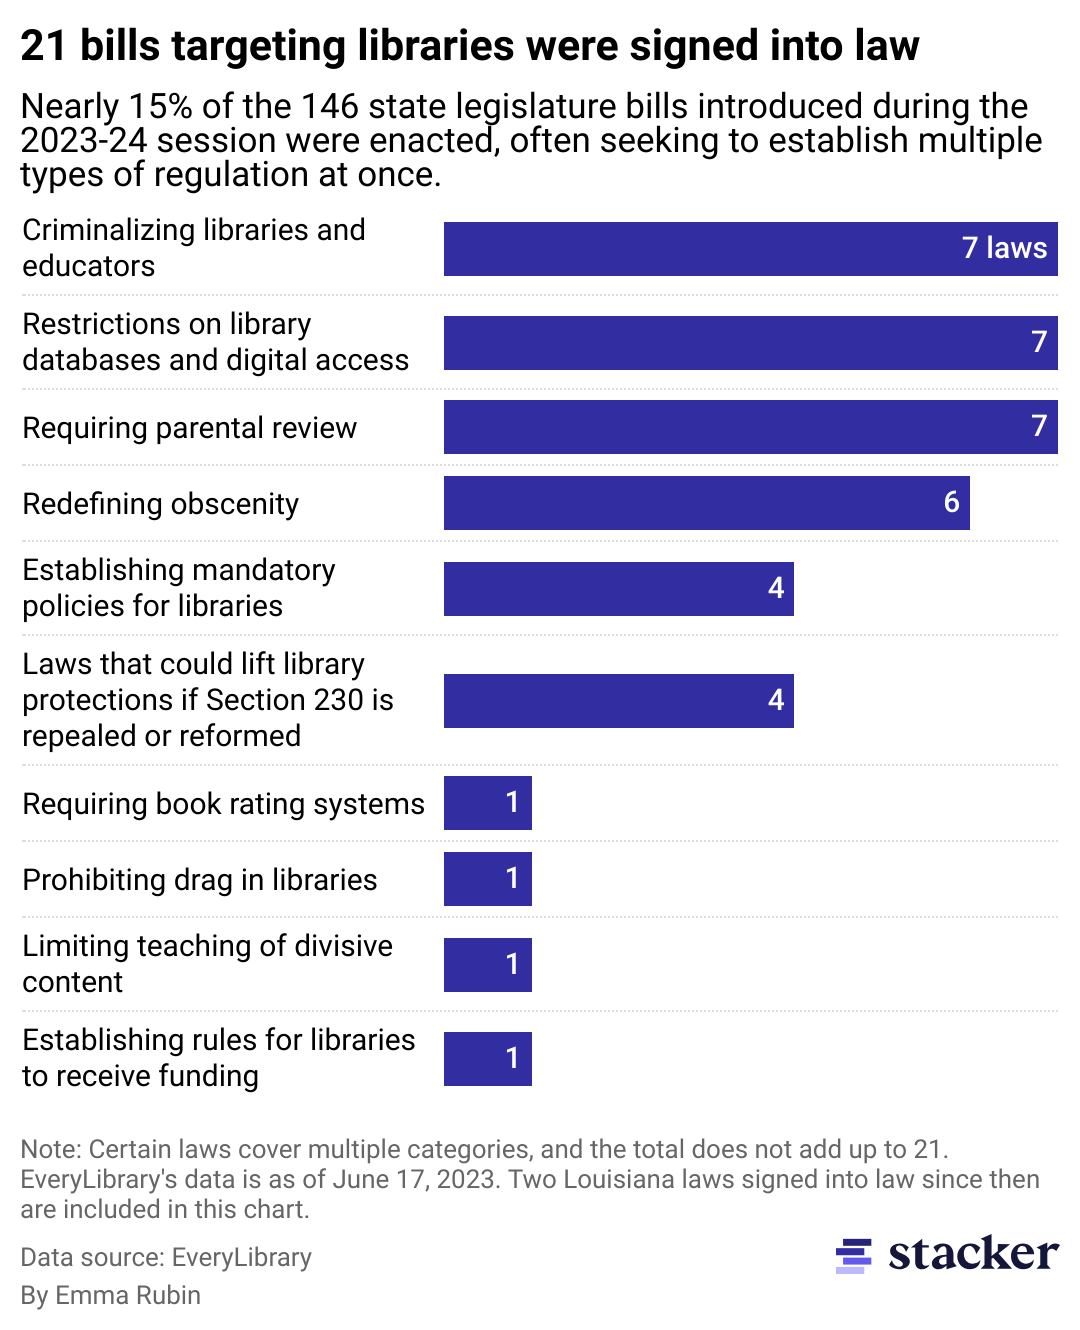 Bar chart showing that 21 bills targeting libraries have been signed into laws across a number of categories, including redefining obscenity and criminalizing librarians and educators.